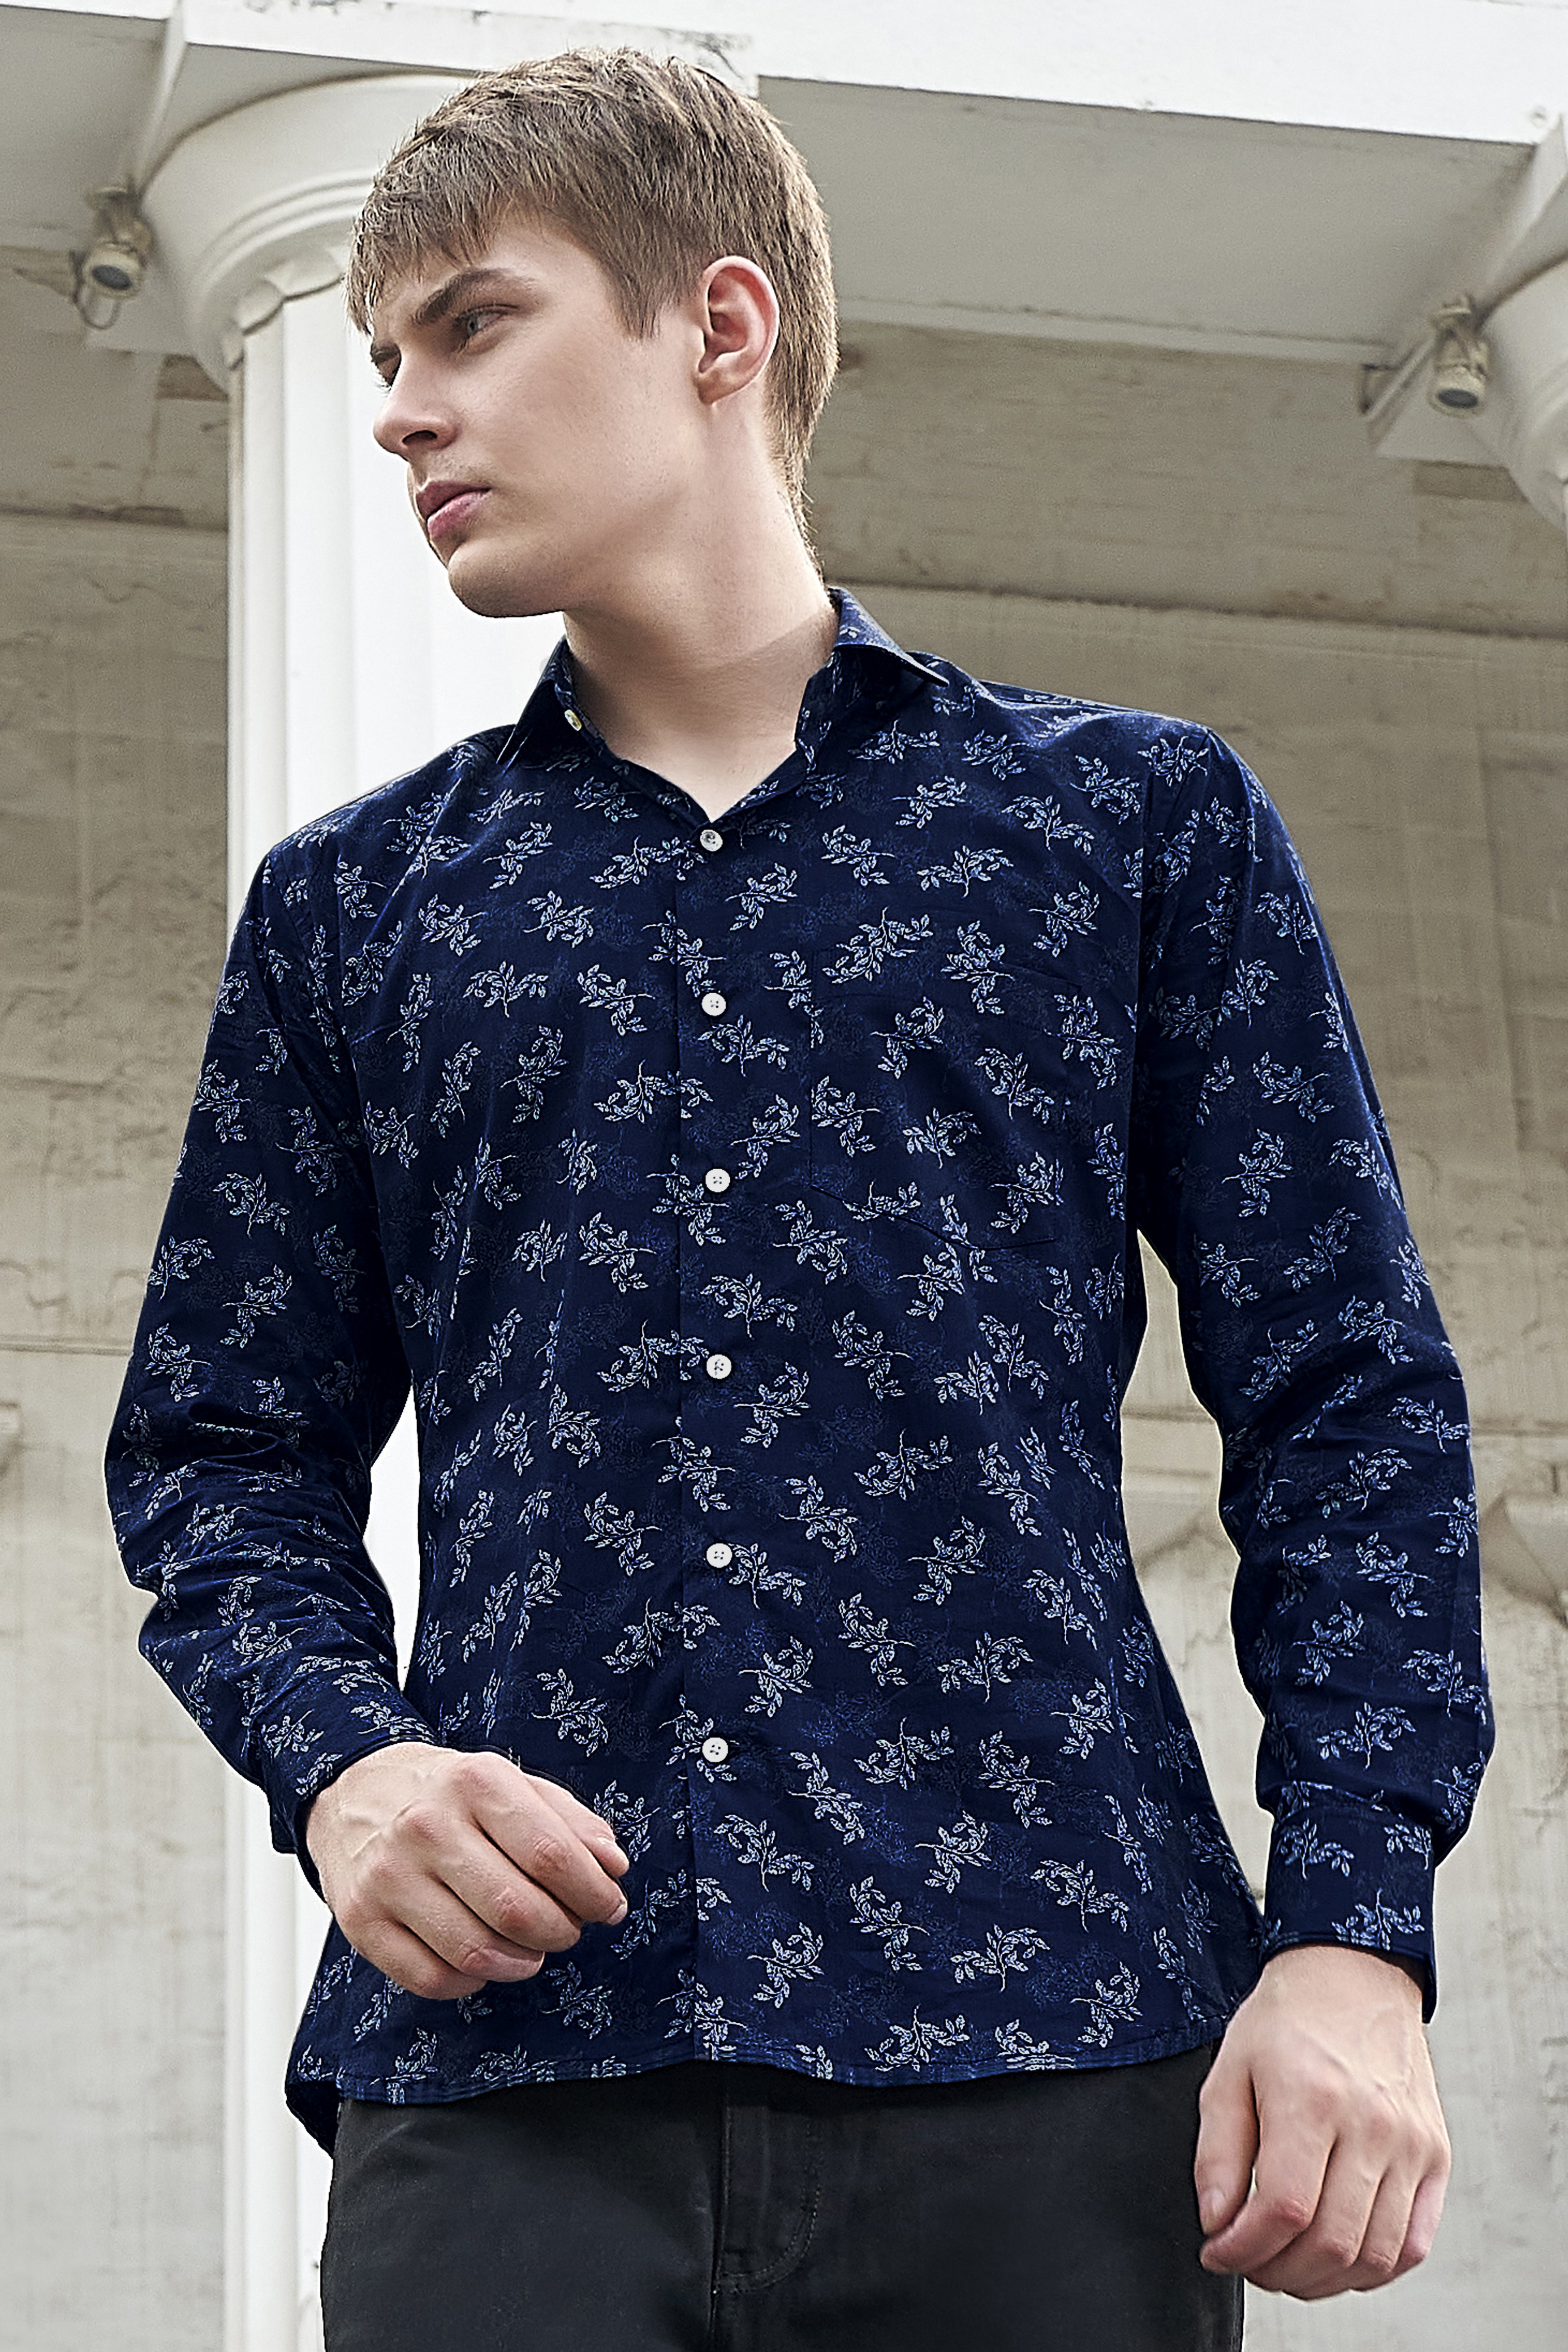 Baltic Navy Blue With Ditsy Printed Super Soft Premium Cotton Shirt